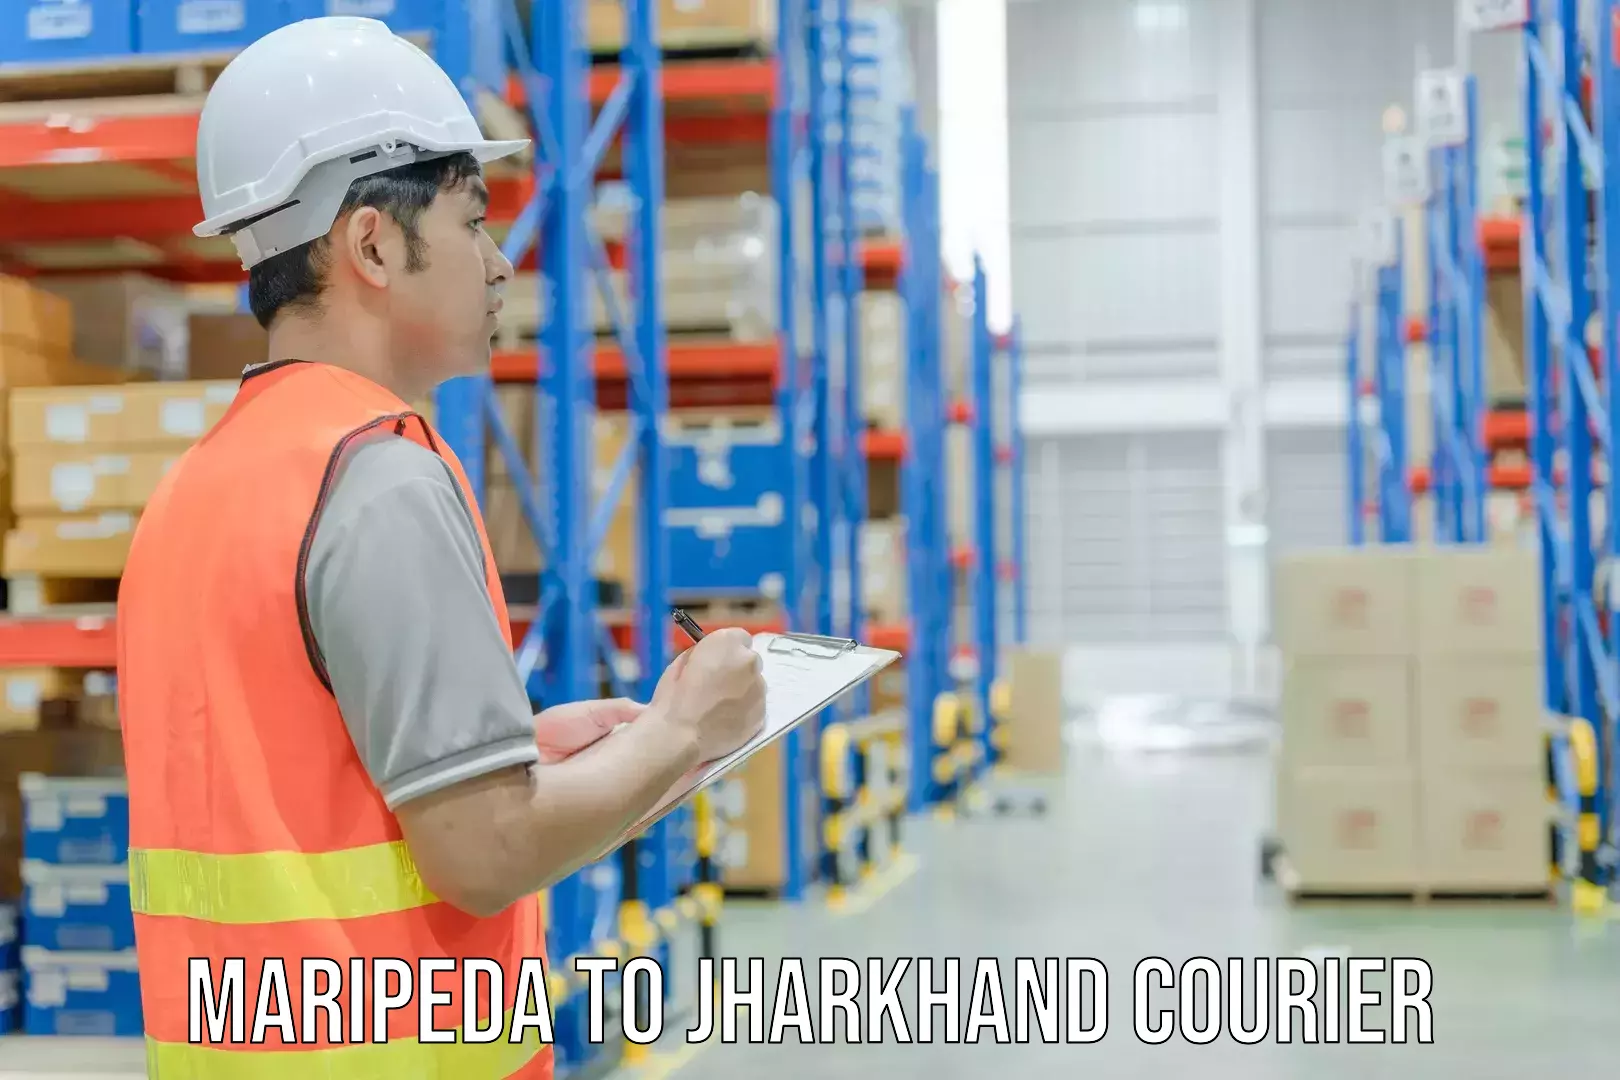 International courier networks Maripeda to Jharkhand